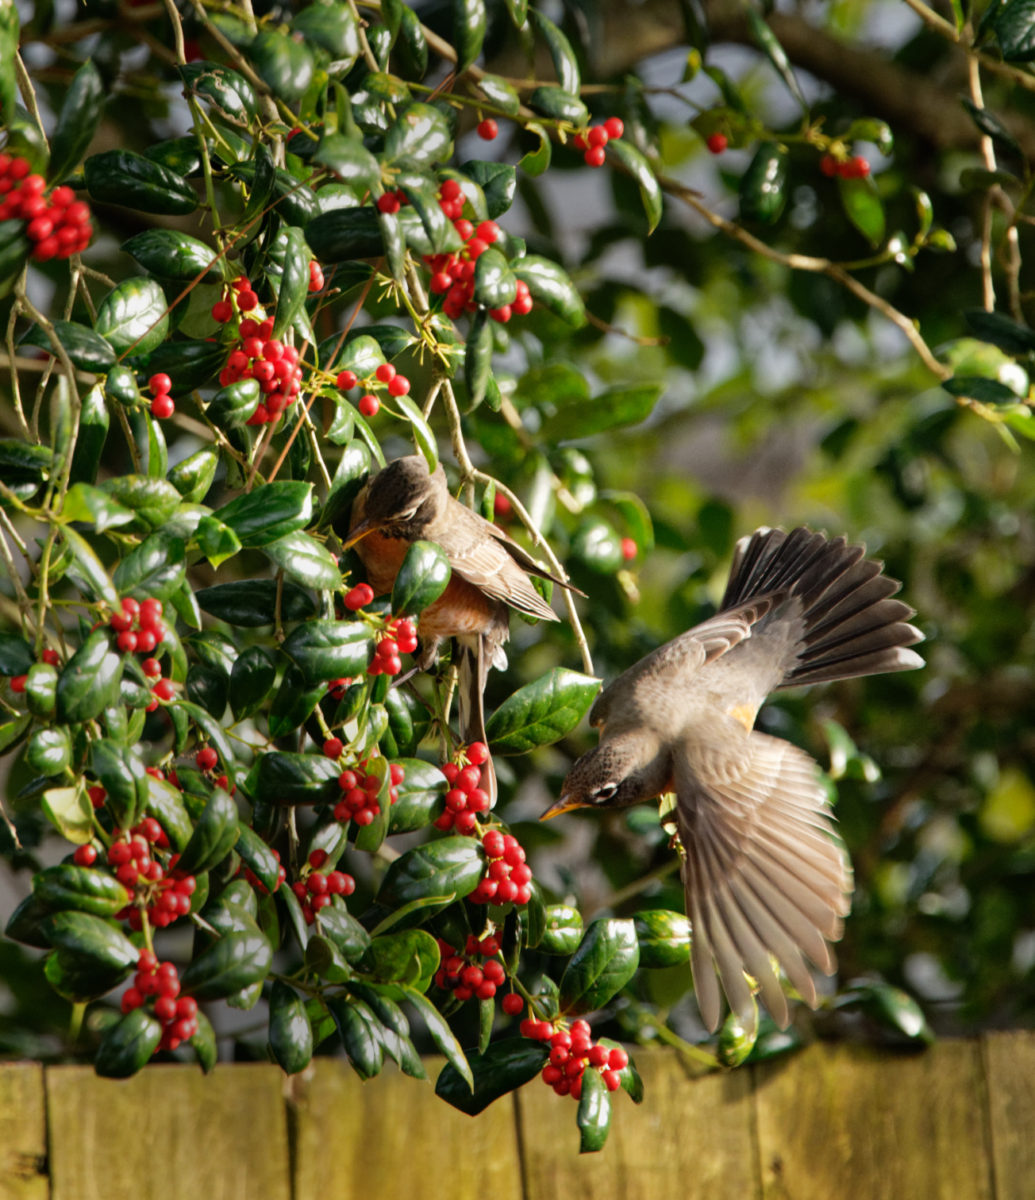 Robins flying near holly berries